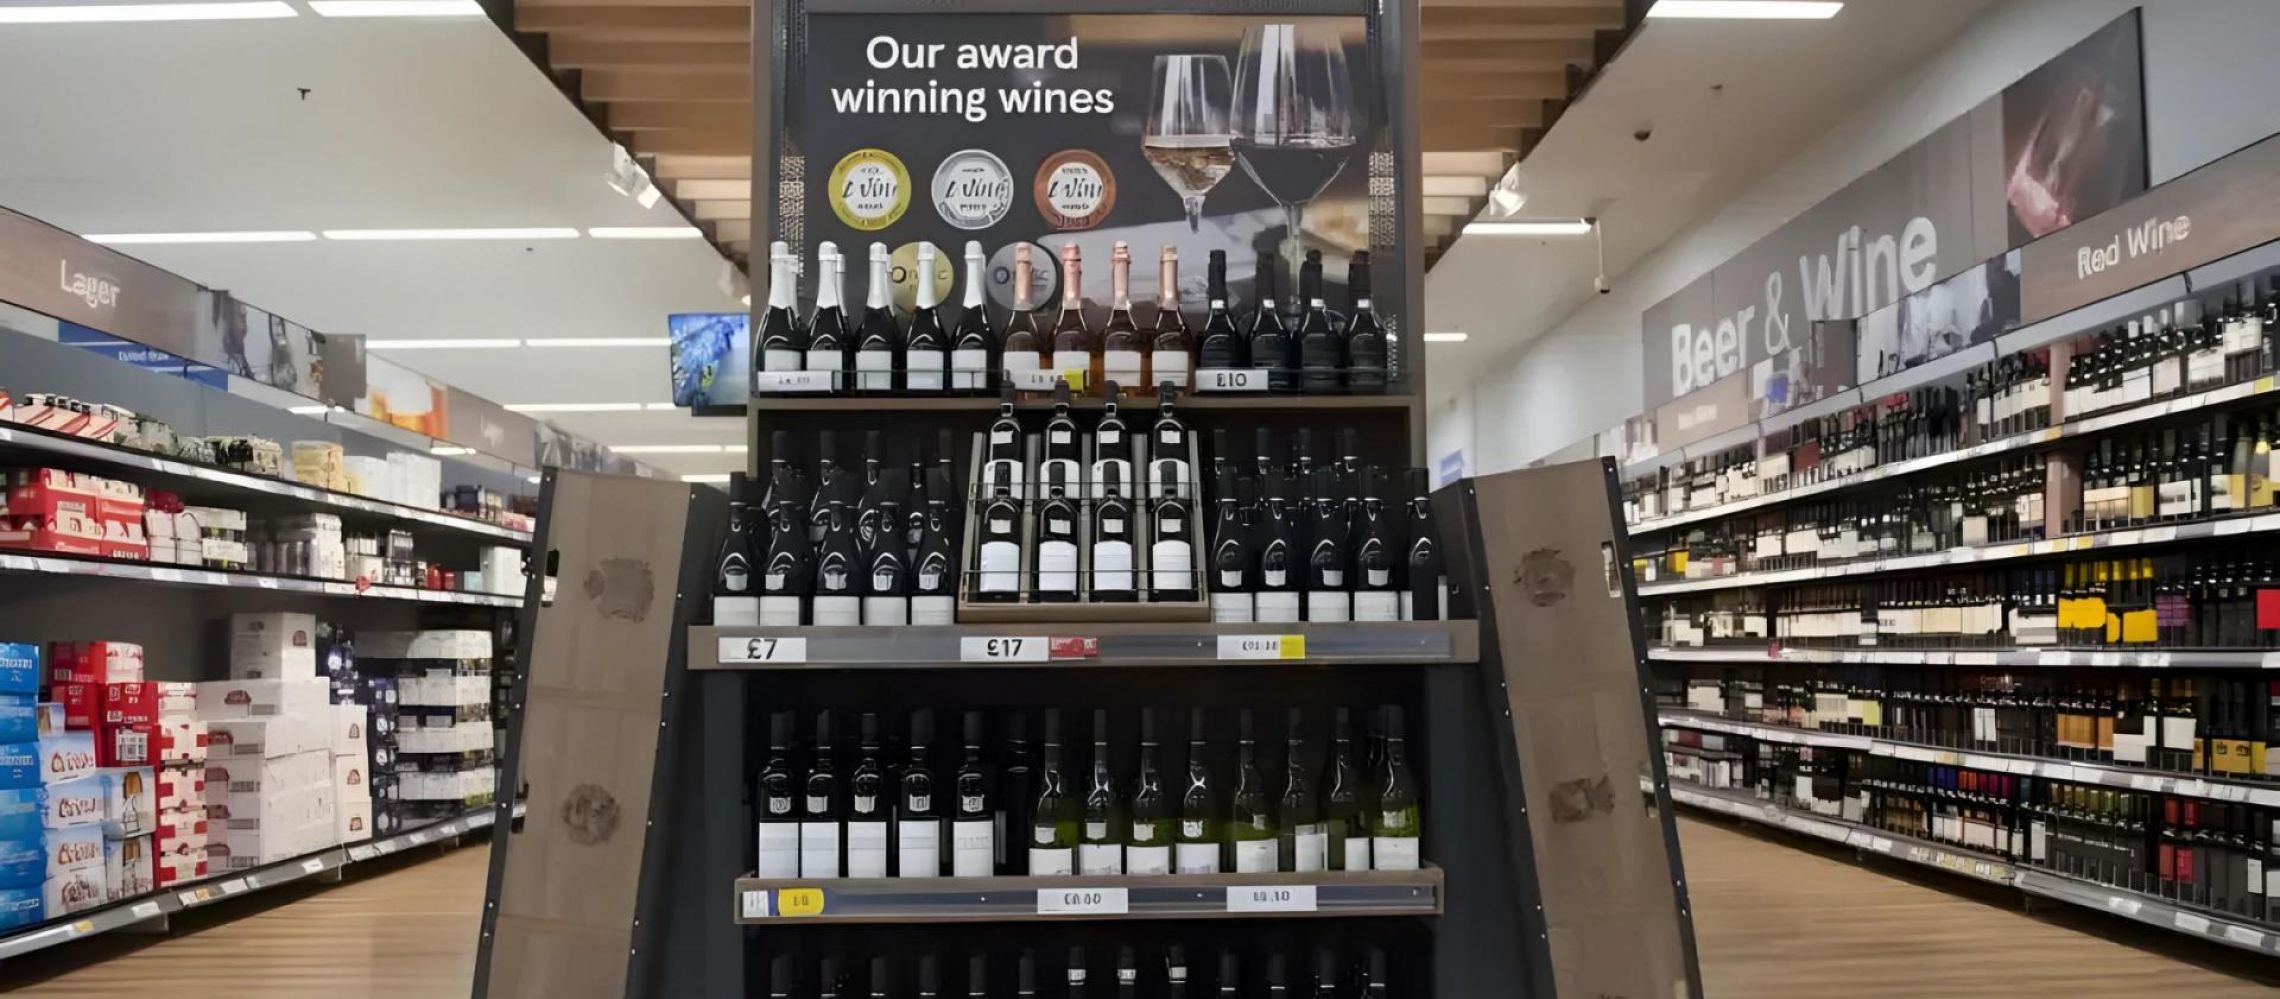 Photo for: The Significance of UK Supermarkets to the Wine Industry